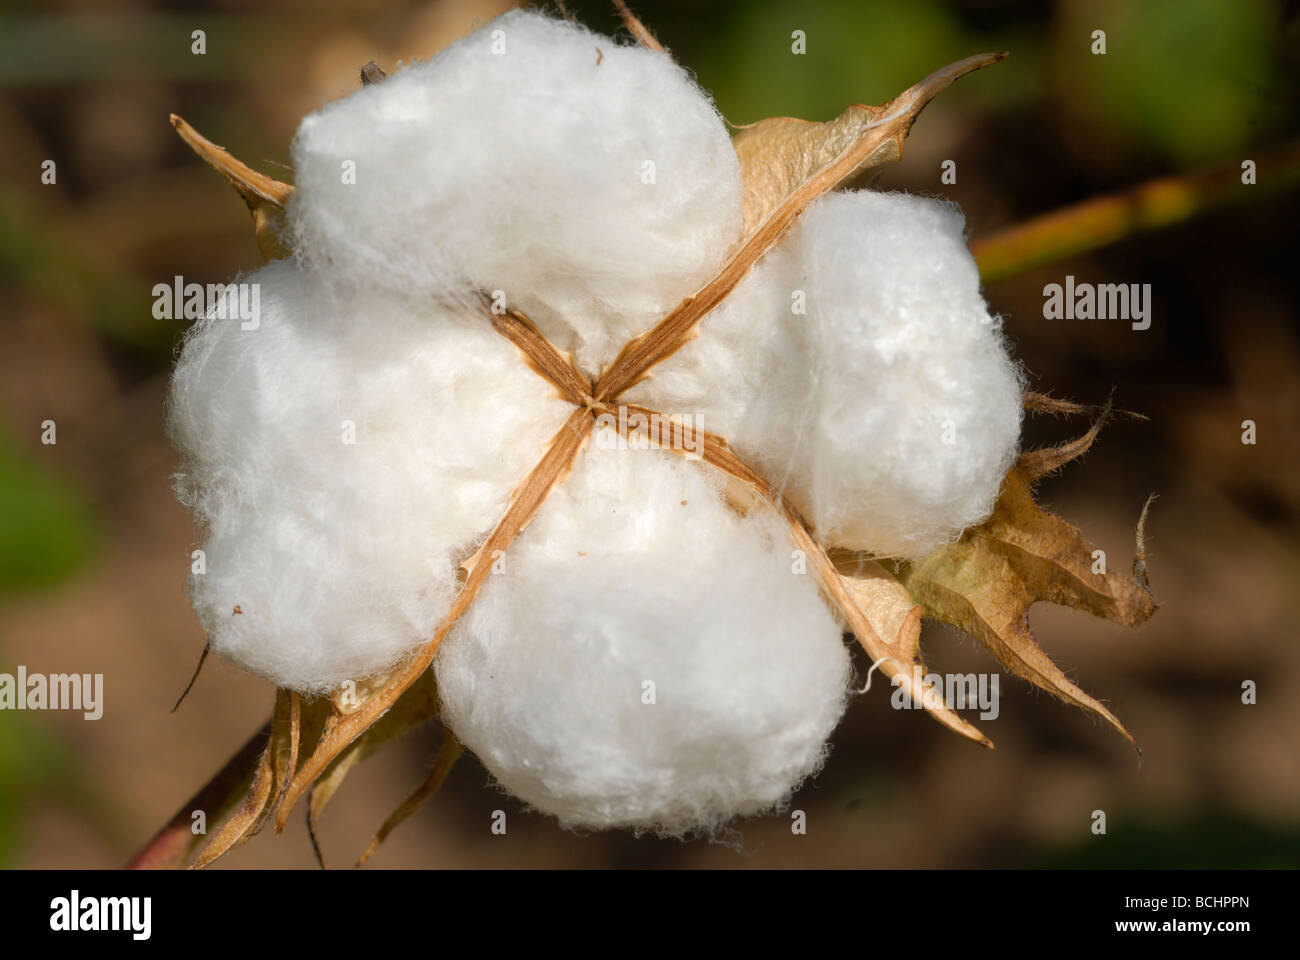 West-africa, Mali, organic and fairtrade cotton , cotton plant , ripen boll formation with white fibre Stock Photo